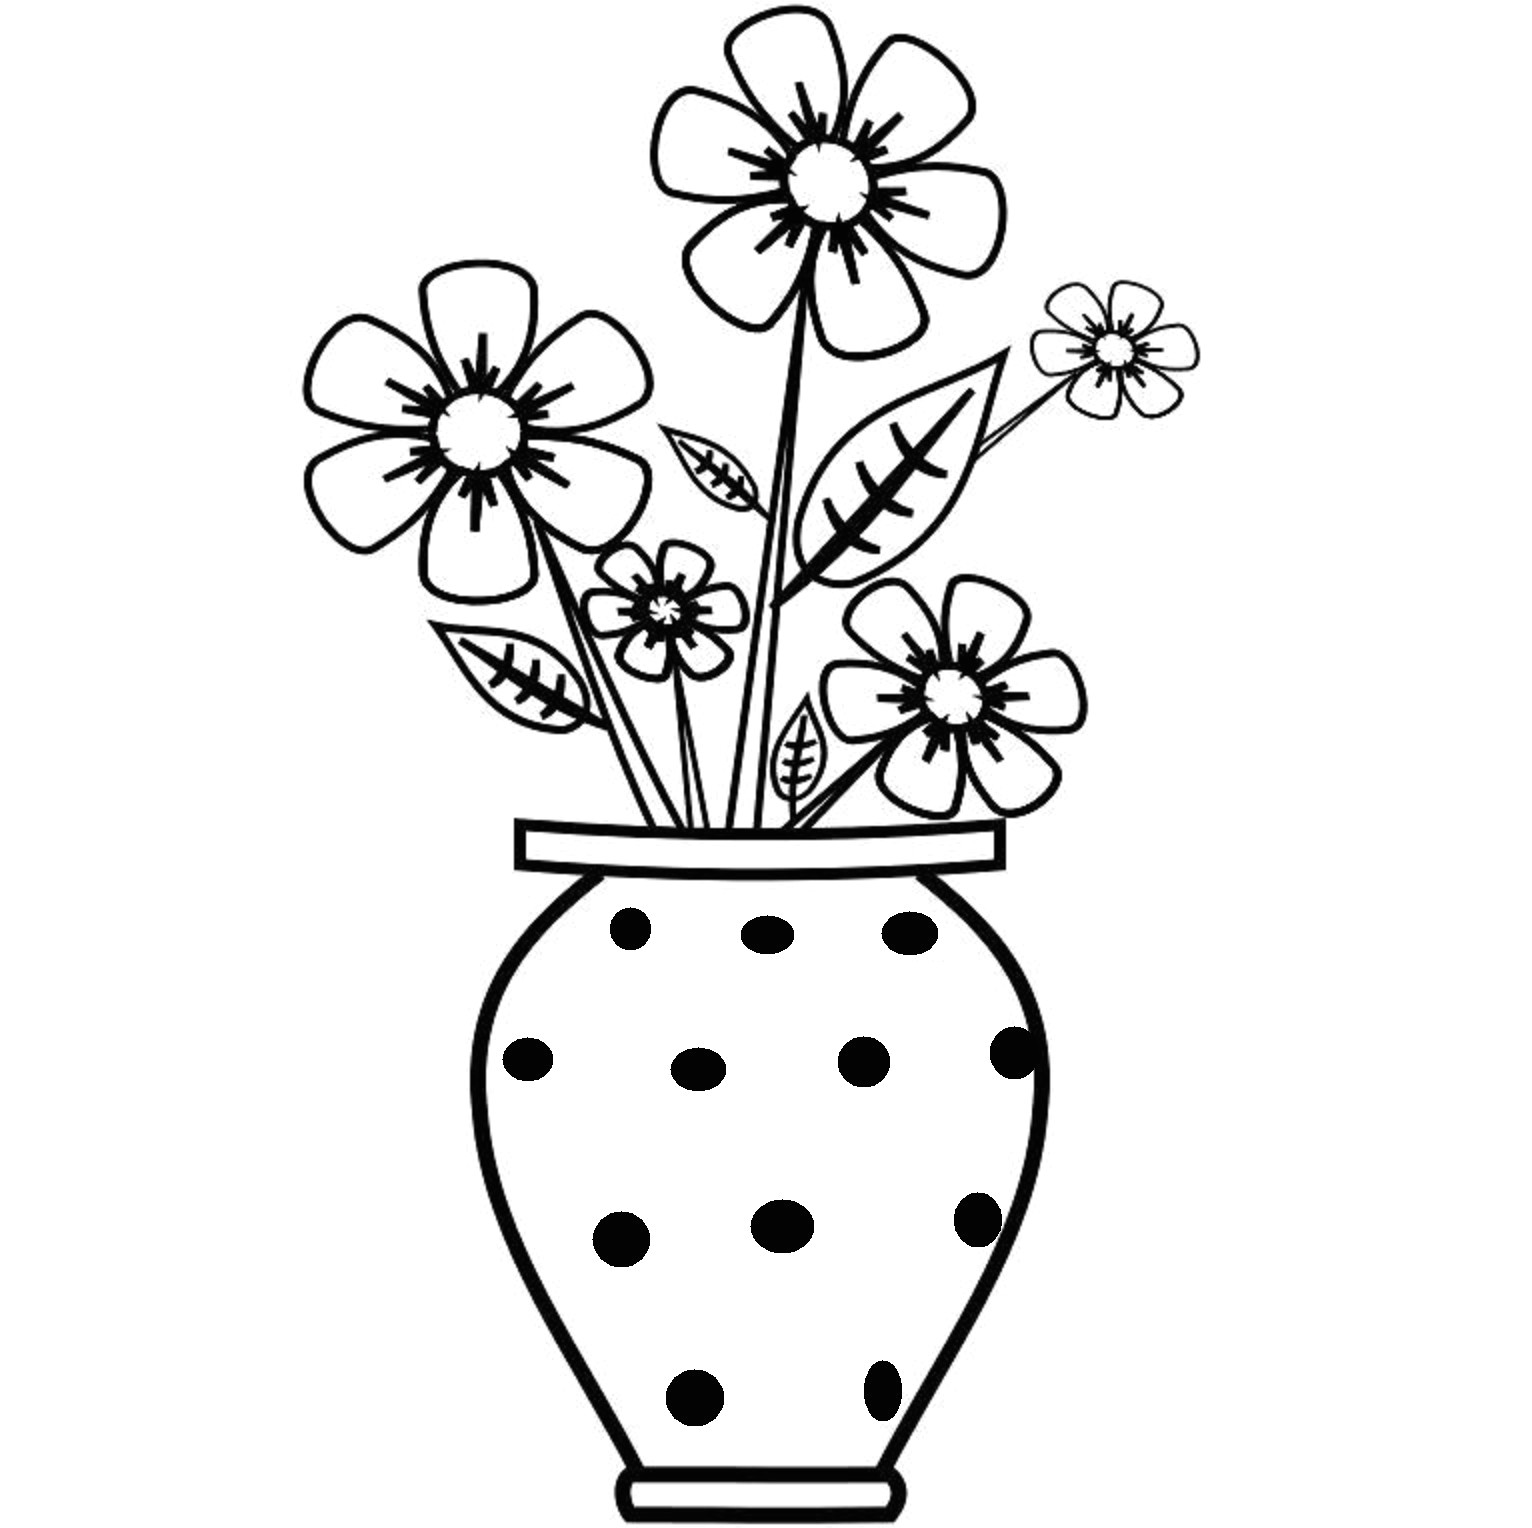 Easy Drawings Of Flower Pot Flowers to Draw Easy Step by Step Flower Pot for Drawing Sketches